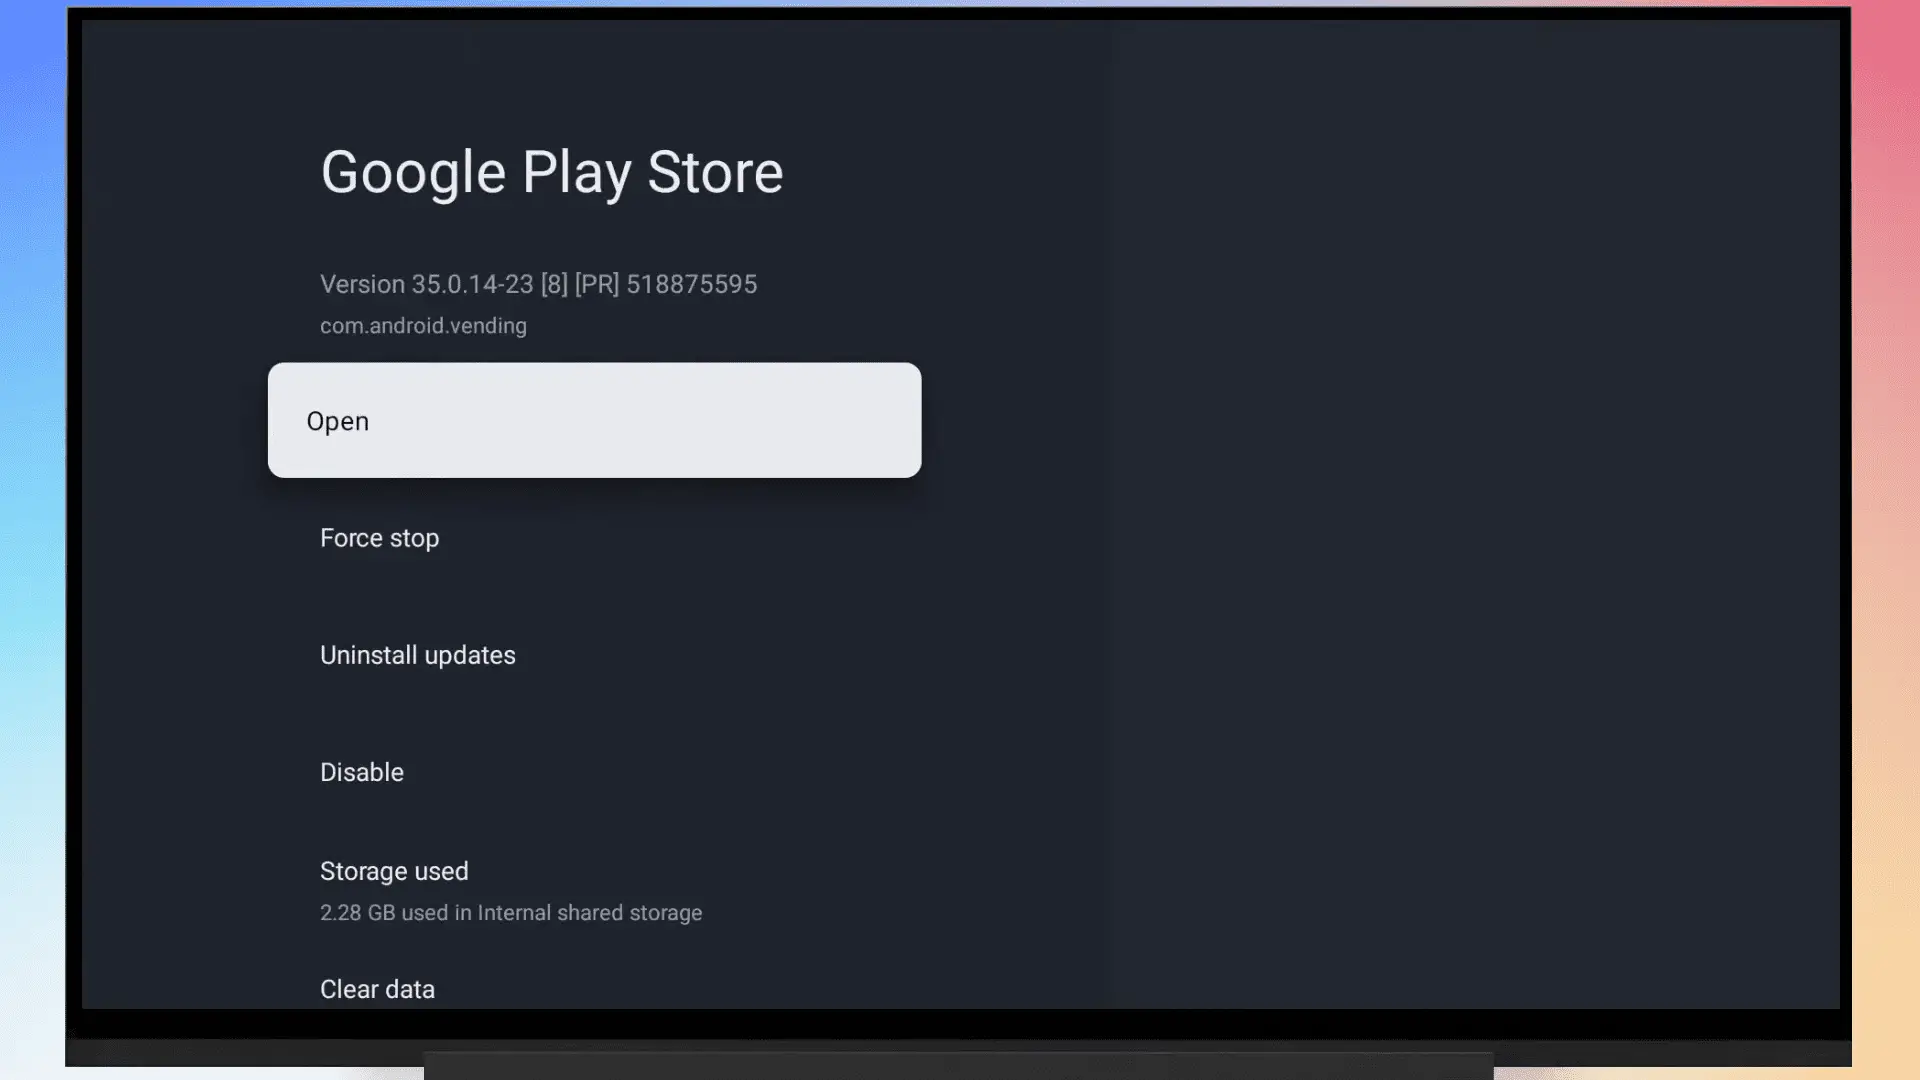 Installing the Google Play Store